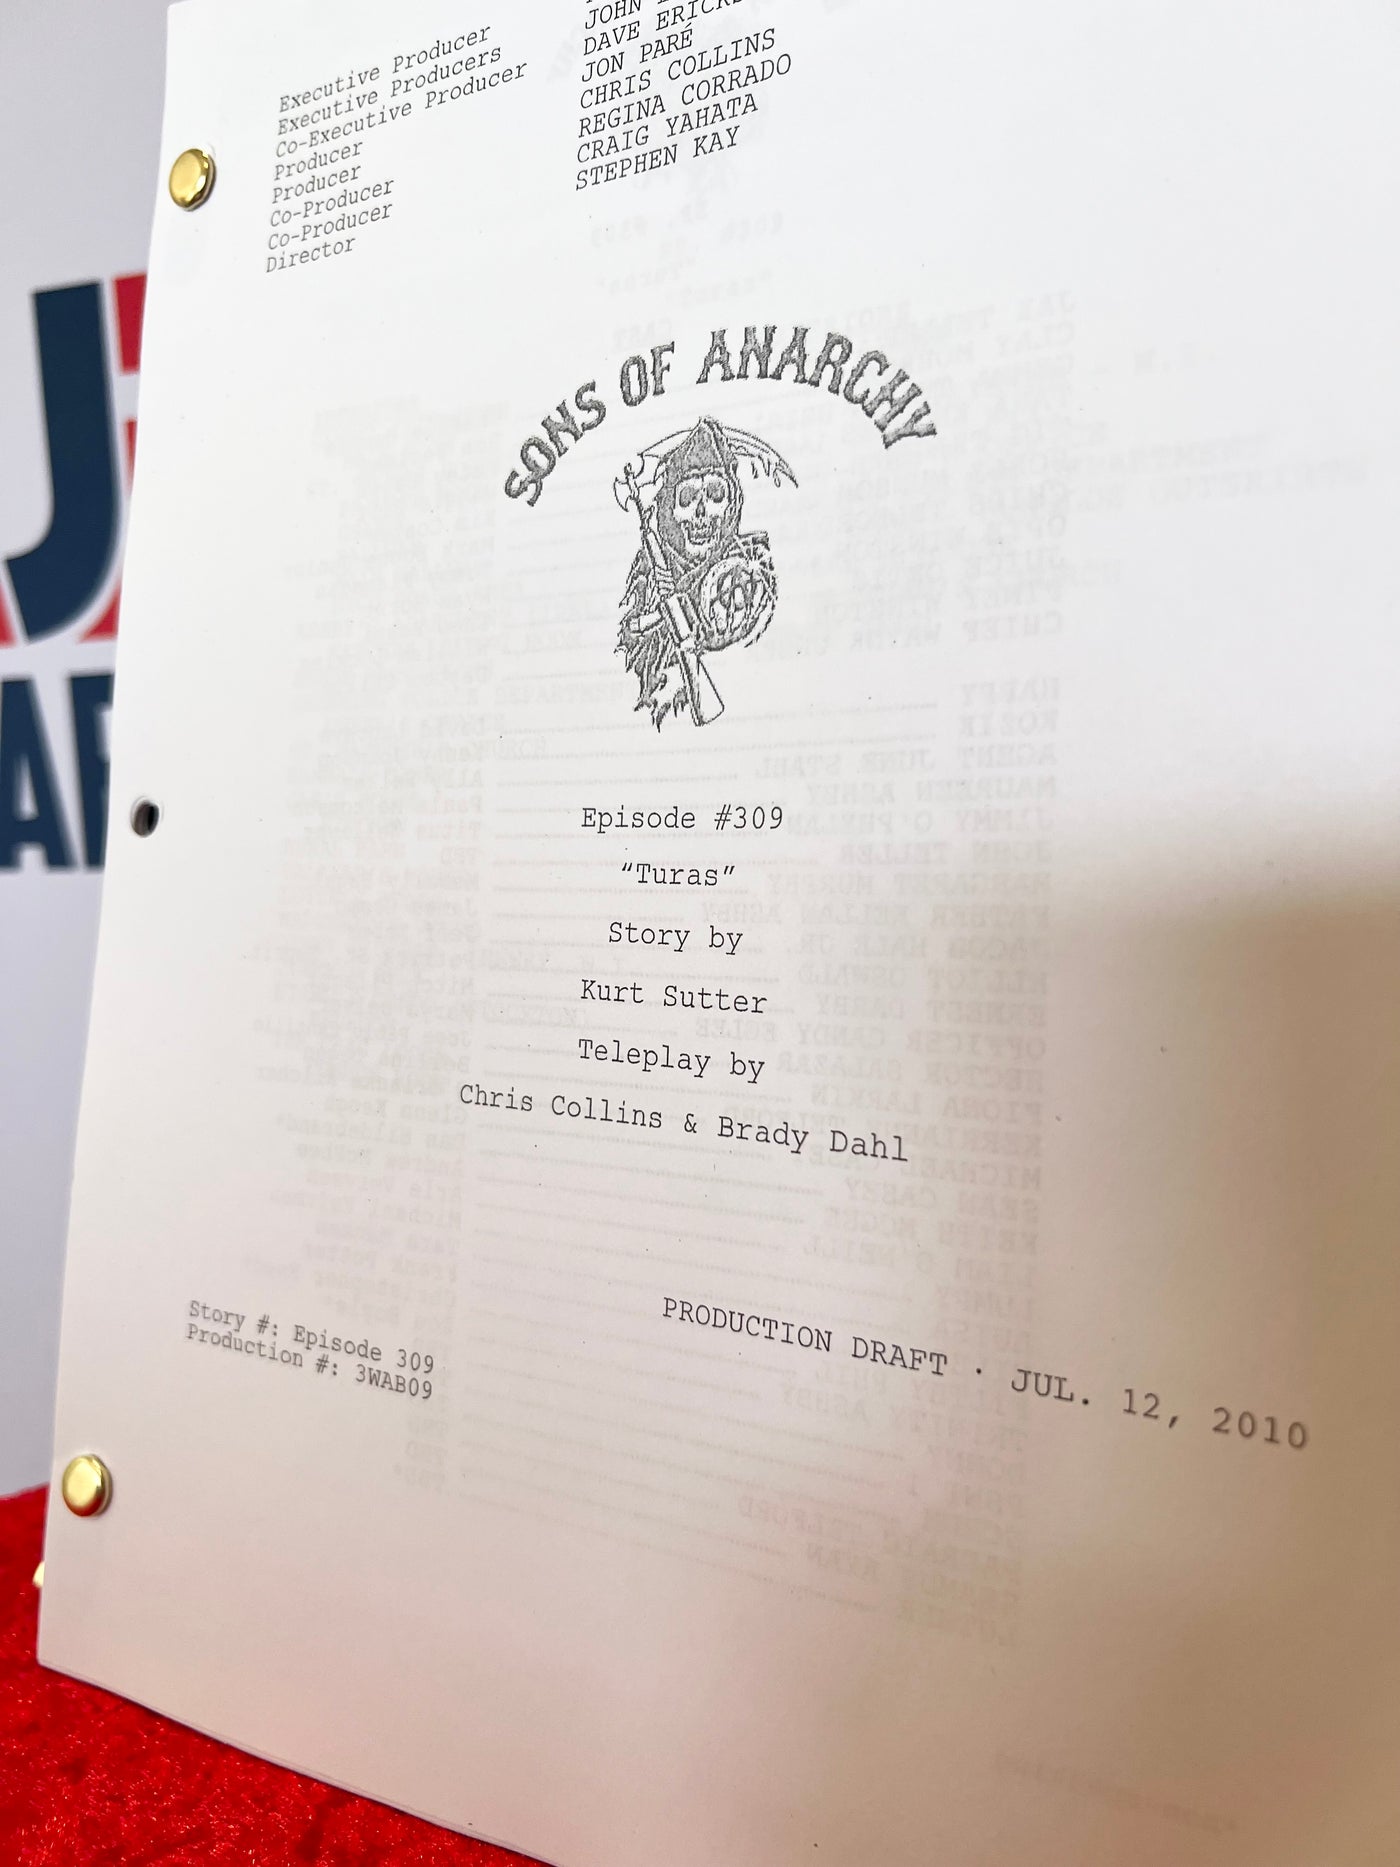 Sons of Anarchy Replica Script Unsigned Episode 309 Turas